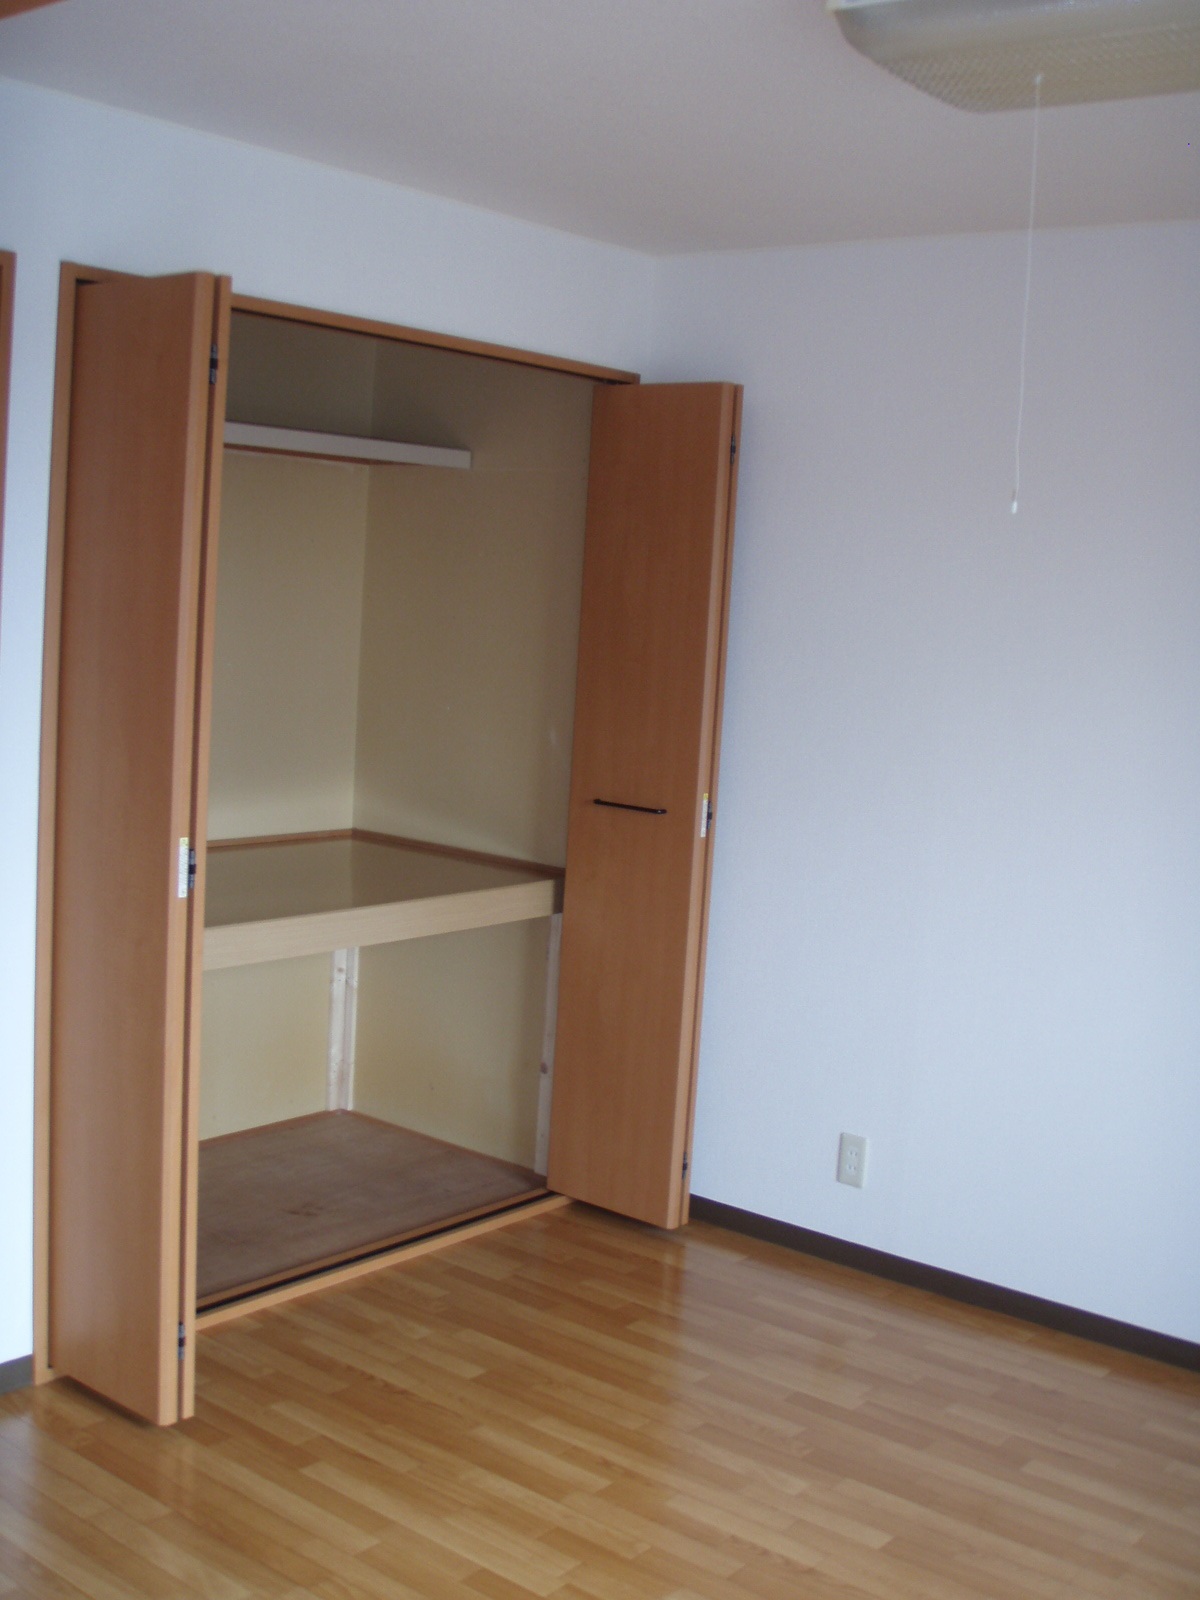 Living and room. Closet on the left side of Western-style room is big